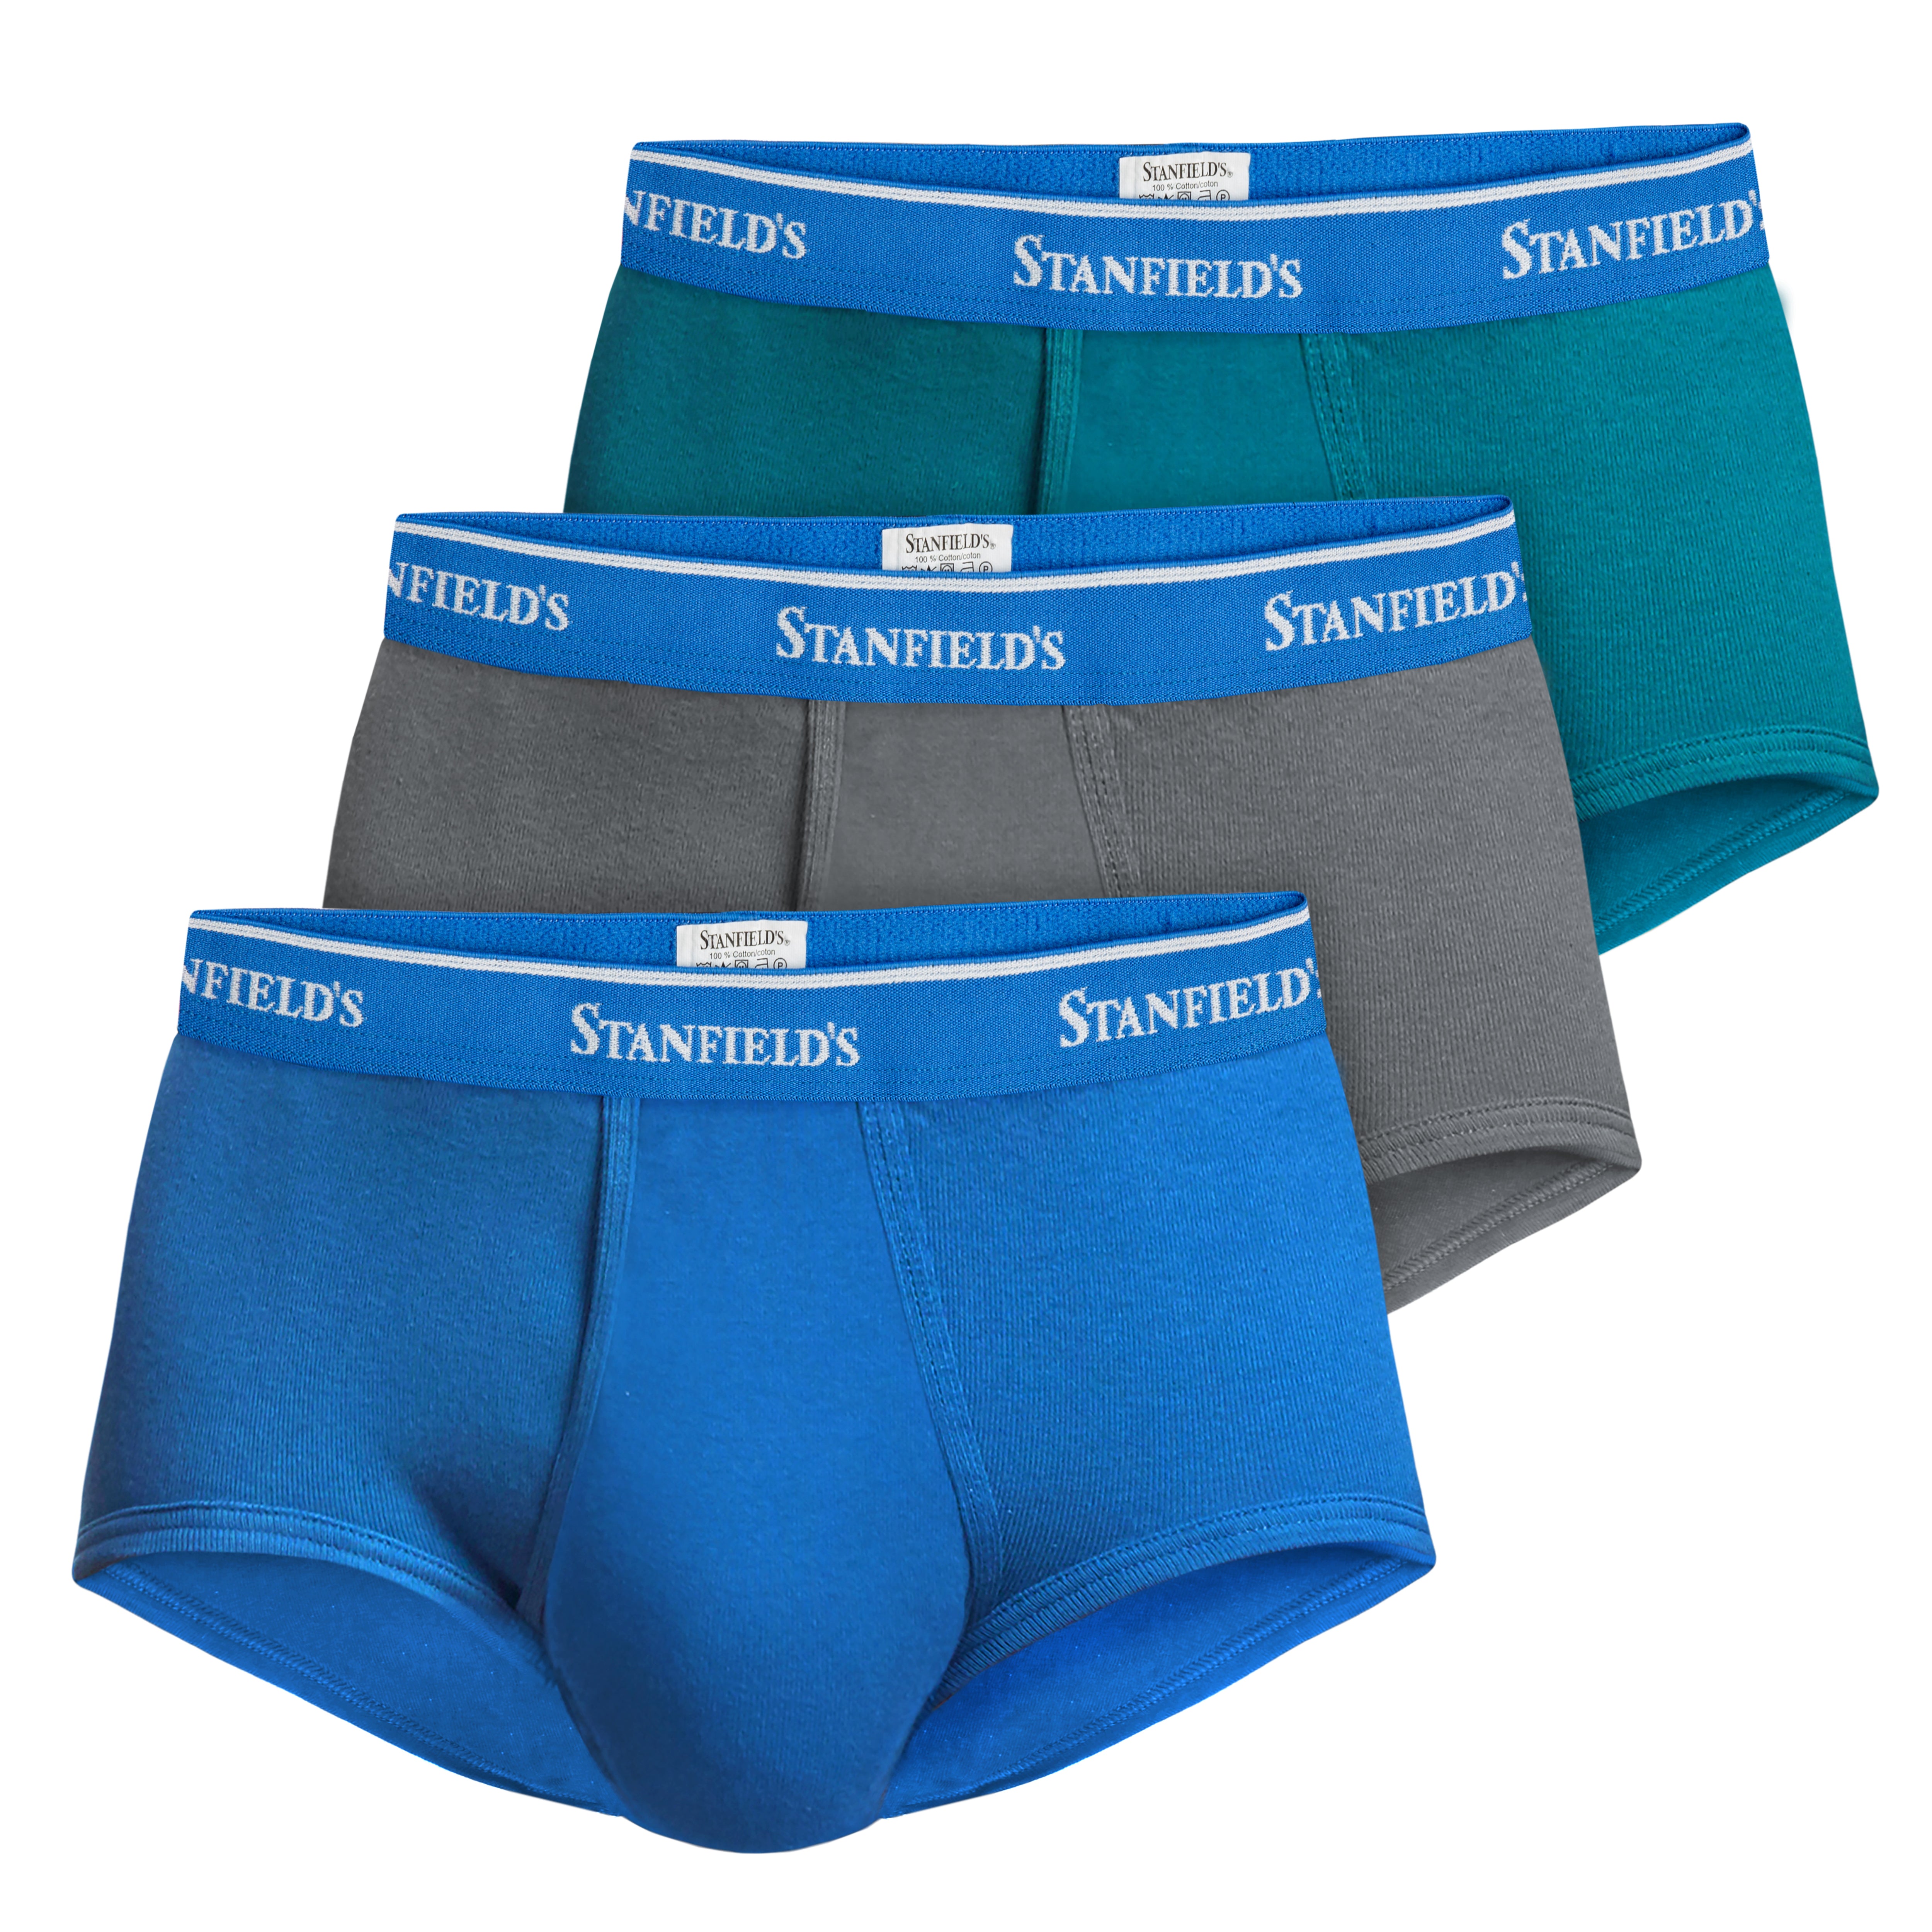 STANFIELDS BRIEFS 6PK + MENS SIZES S - XL at Costco Brant St